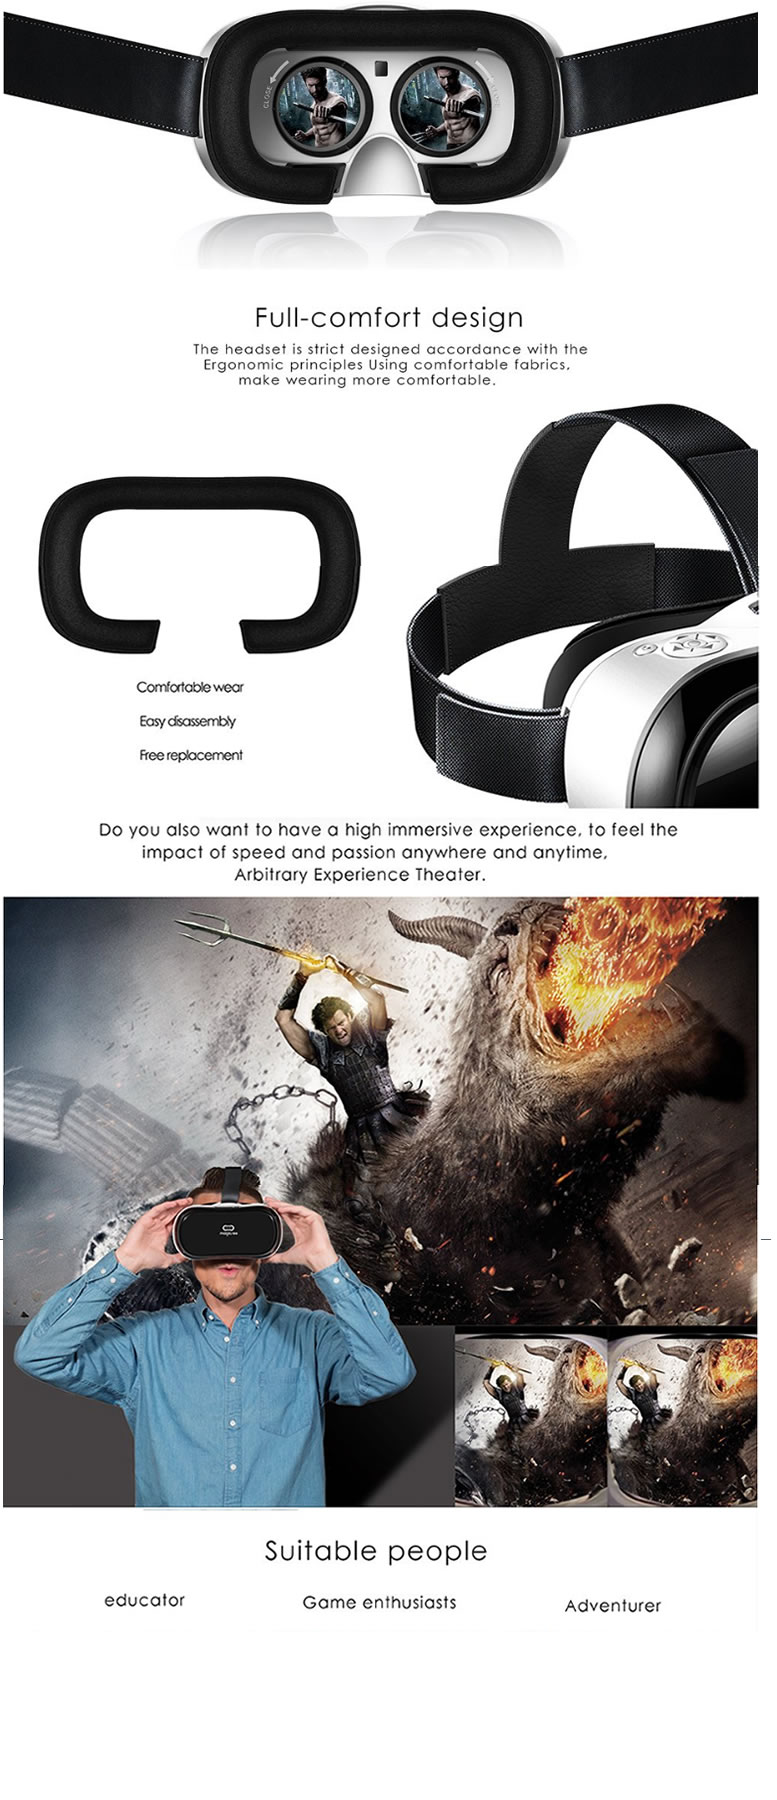 Magicsee M1 ALL IN ONE VR Virtual Reality 3D Glasses